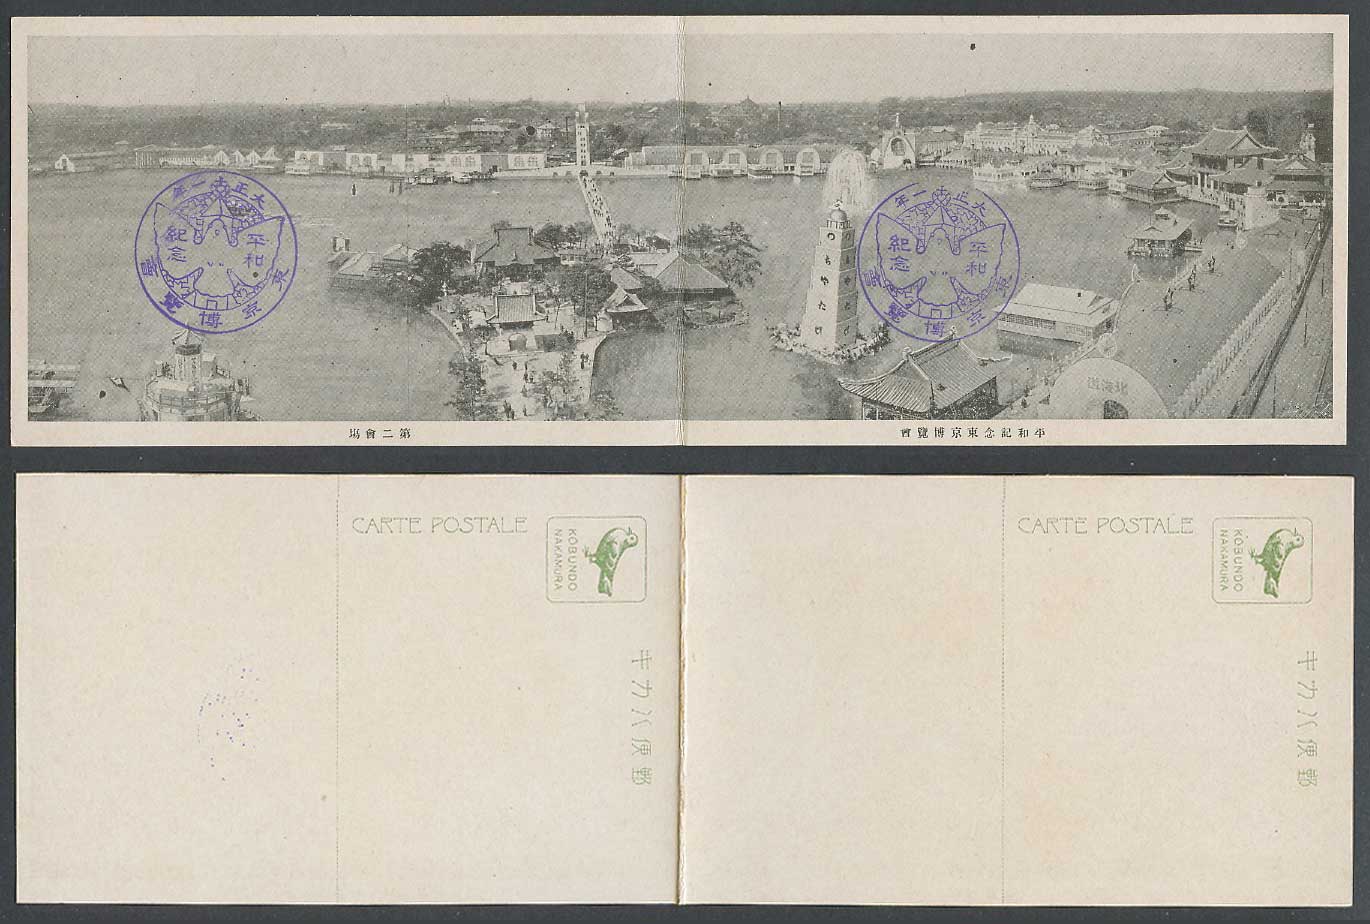 Japan 1922 Tokyo Peace Expo 2 Old attached Postcards 1 Panorama 2nd Hall, Towers